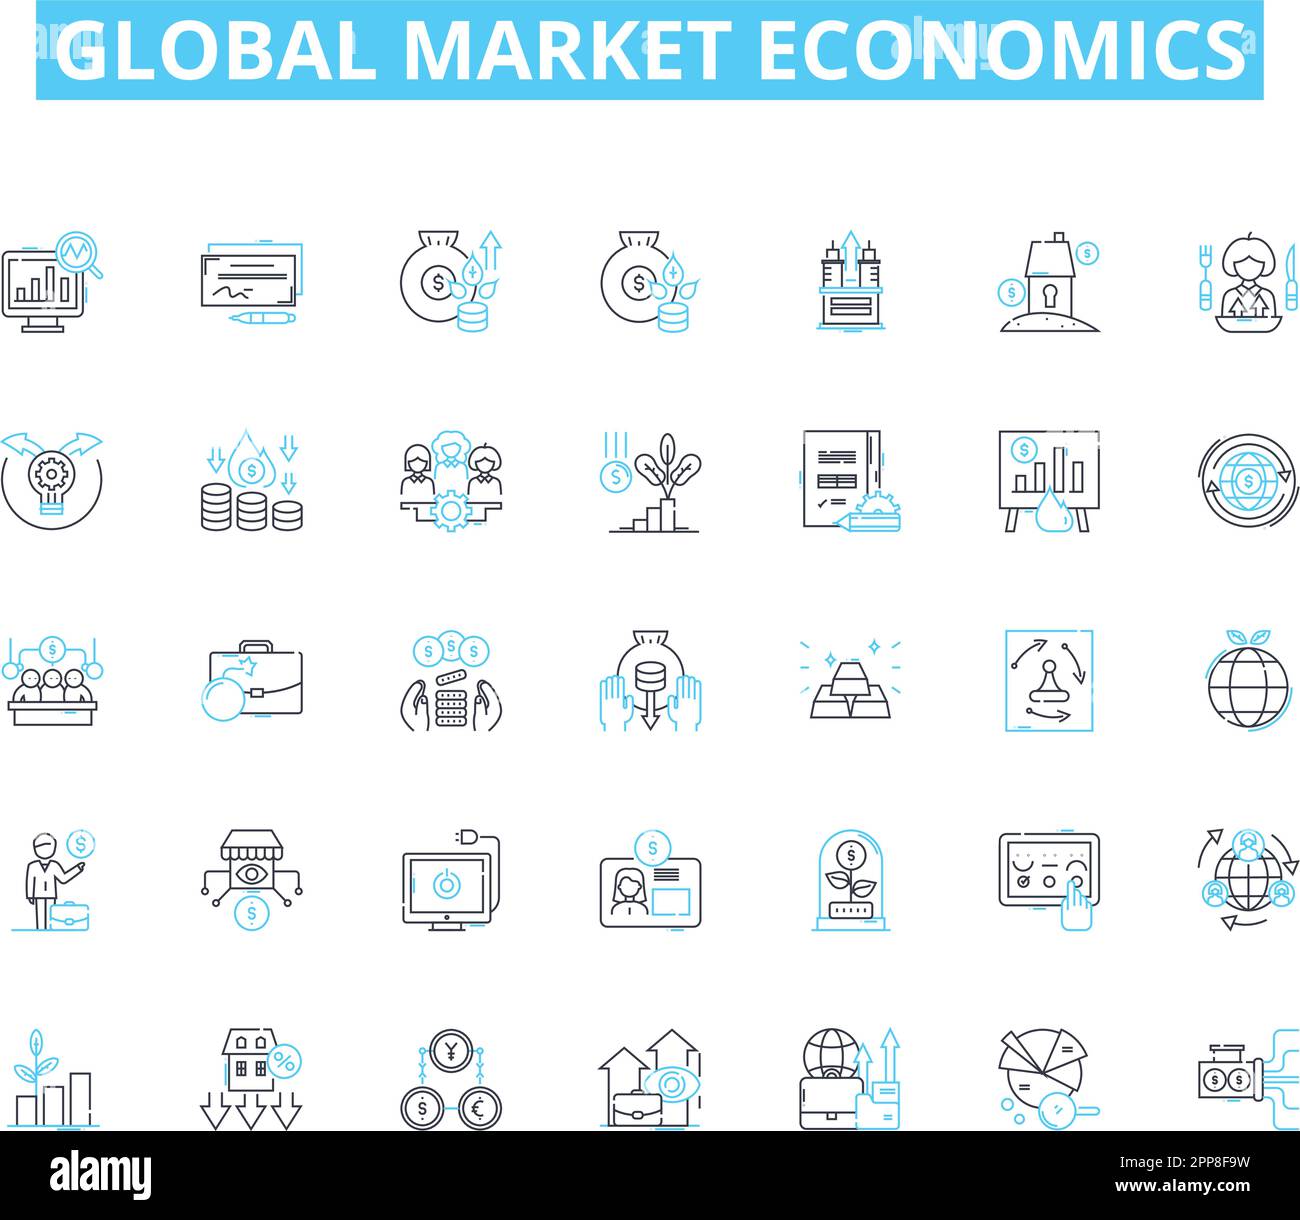 Global market economics linear icons set. Trade, Inflation, Tariffs, Exports, Imports, Currency, Finance line vector and concept signs. Stocks,Bonds Stock Vector